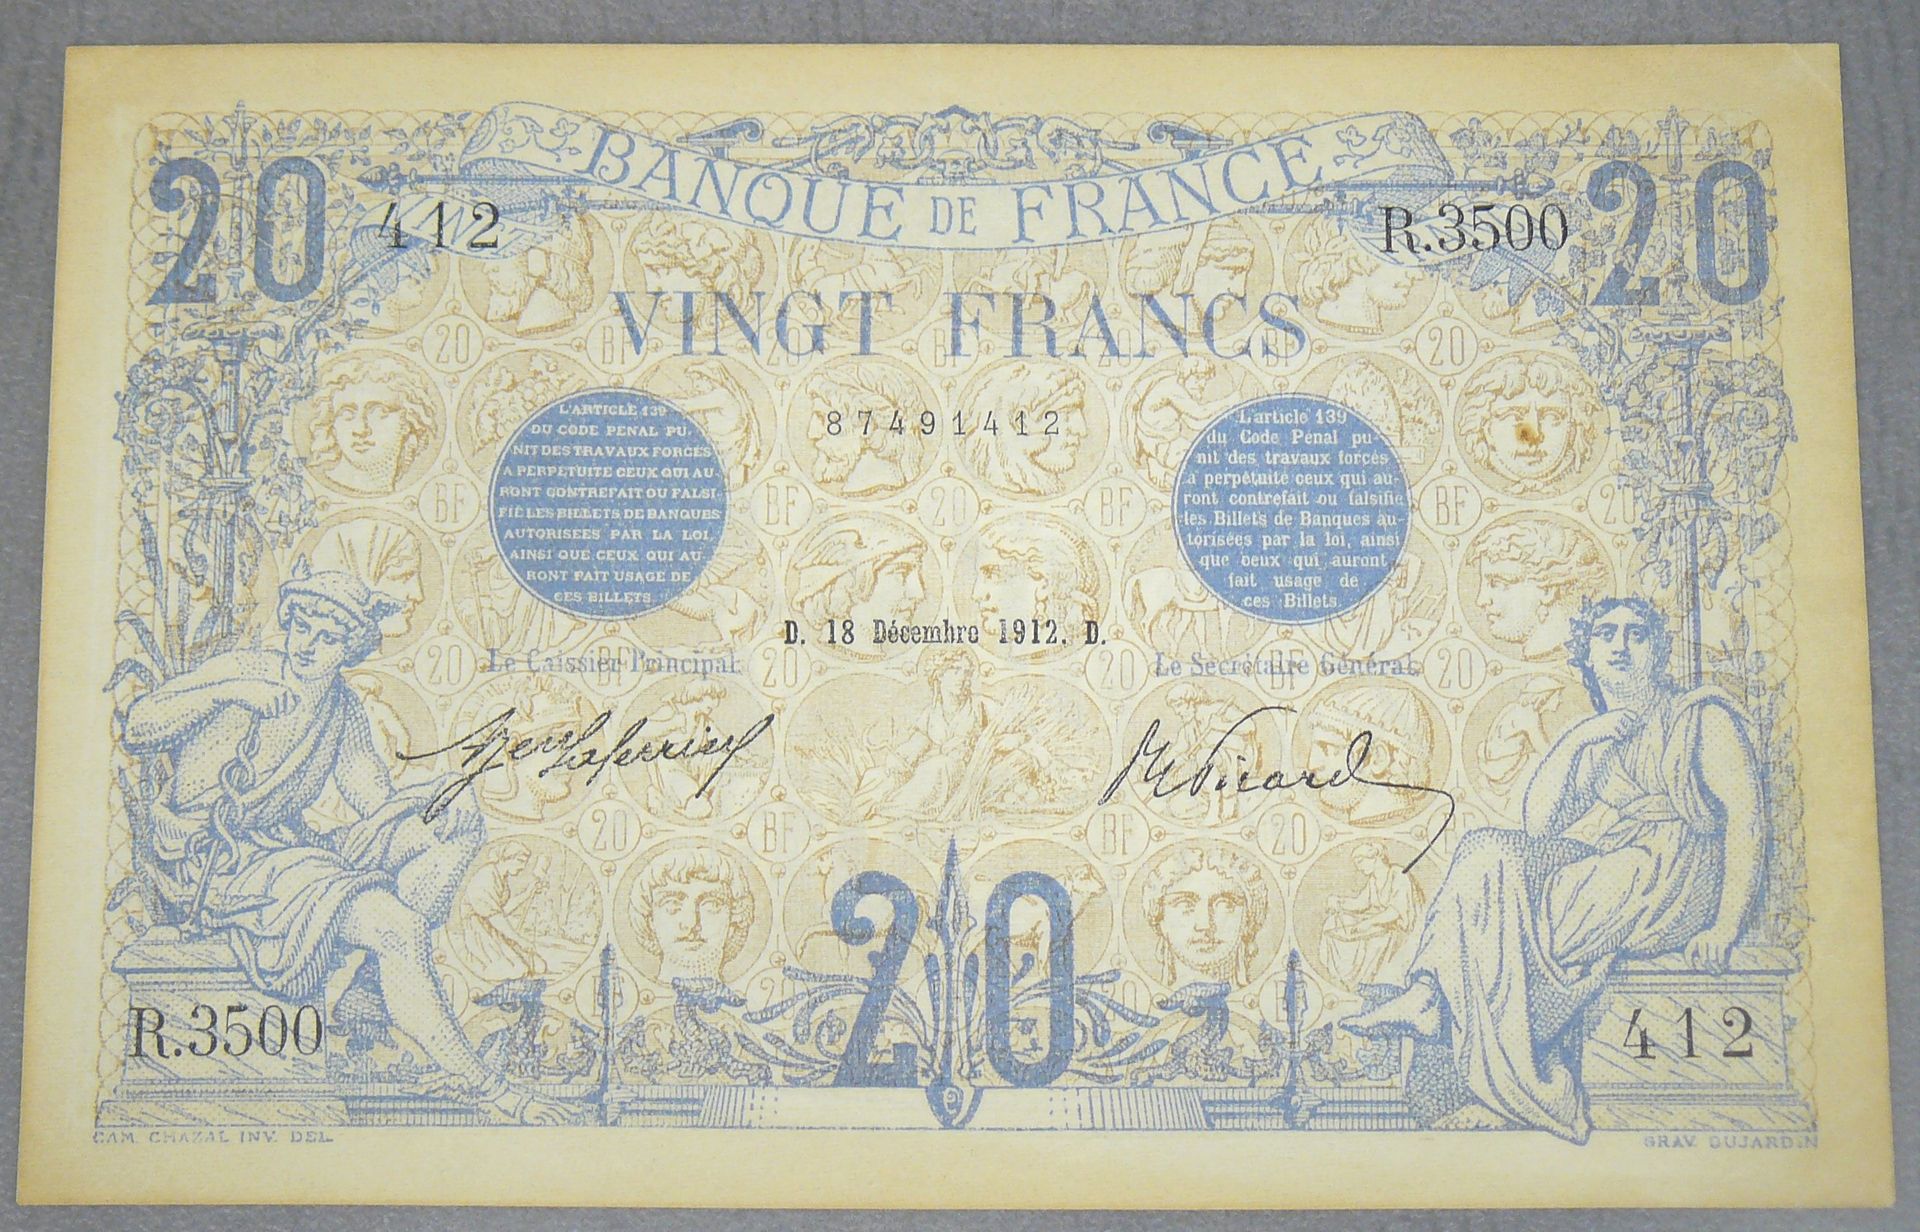 Null 20 FRANCS (BLUE) - 1905型 - Fayette 10 (2) - 1912年12月18日 - 字母3500 R - SUP - &hellip;